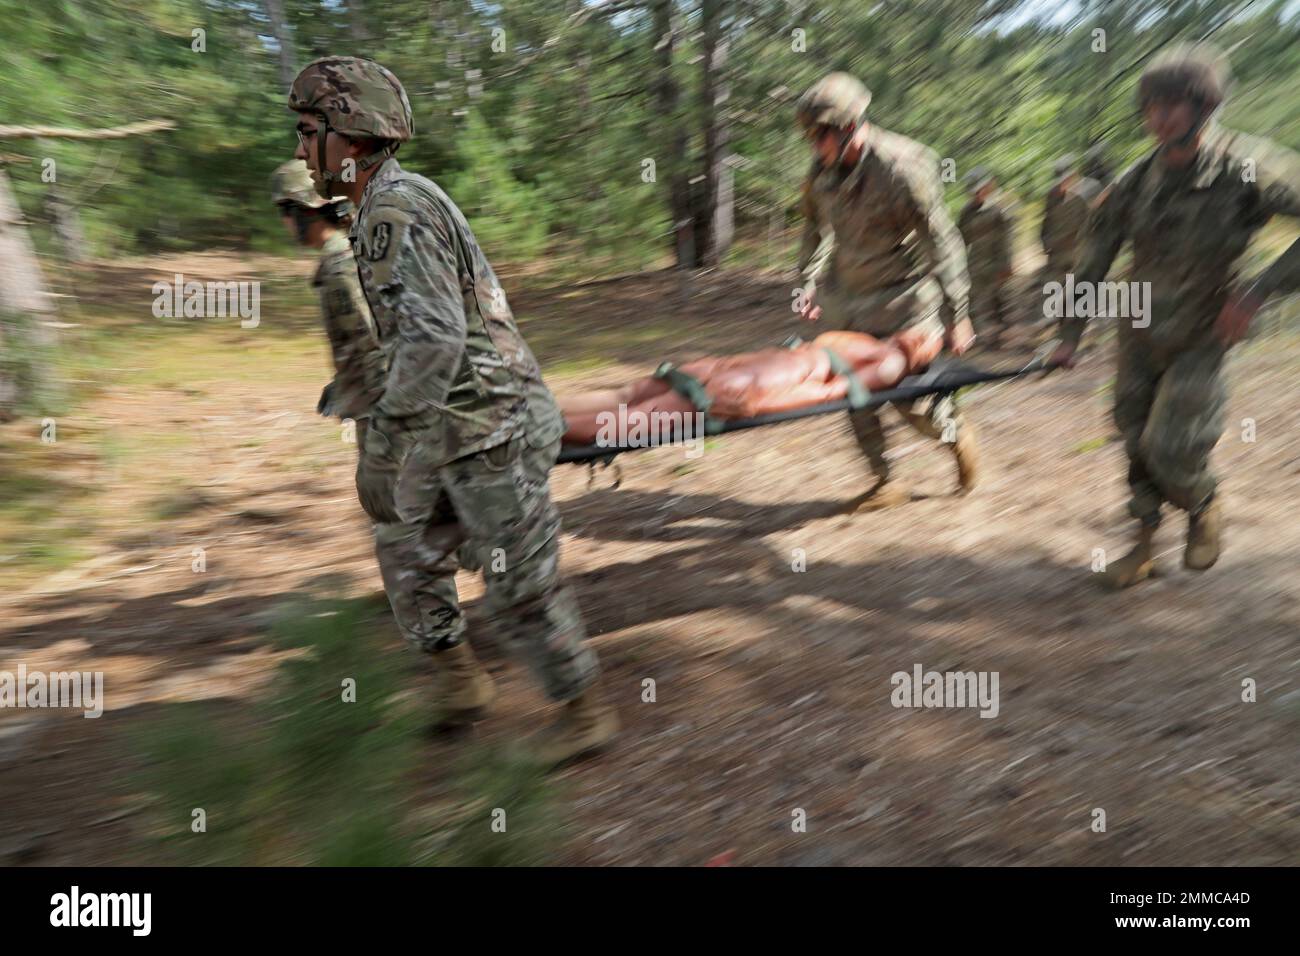 U.S. Army Reserve Spc. William Barrett, front left, assigned to the 452nd Combat Support Hospital, 807th Medical Command (Deployment Support) based in Milwaukee, Wis. and Spc Ashley Carson, left, Spc. Nicholas Radtke and Sgt. Matthew Breitrick run to an obstacle while carrying a 'casualty' on a collapsible litter during a litter obstacle course on Fort McCoy, Wis., Sept. 16, 2022. Stock Photo